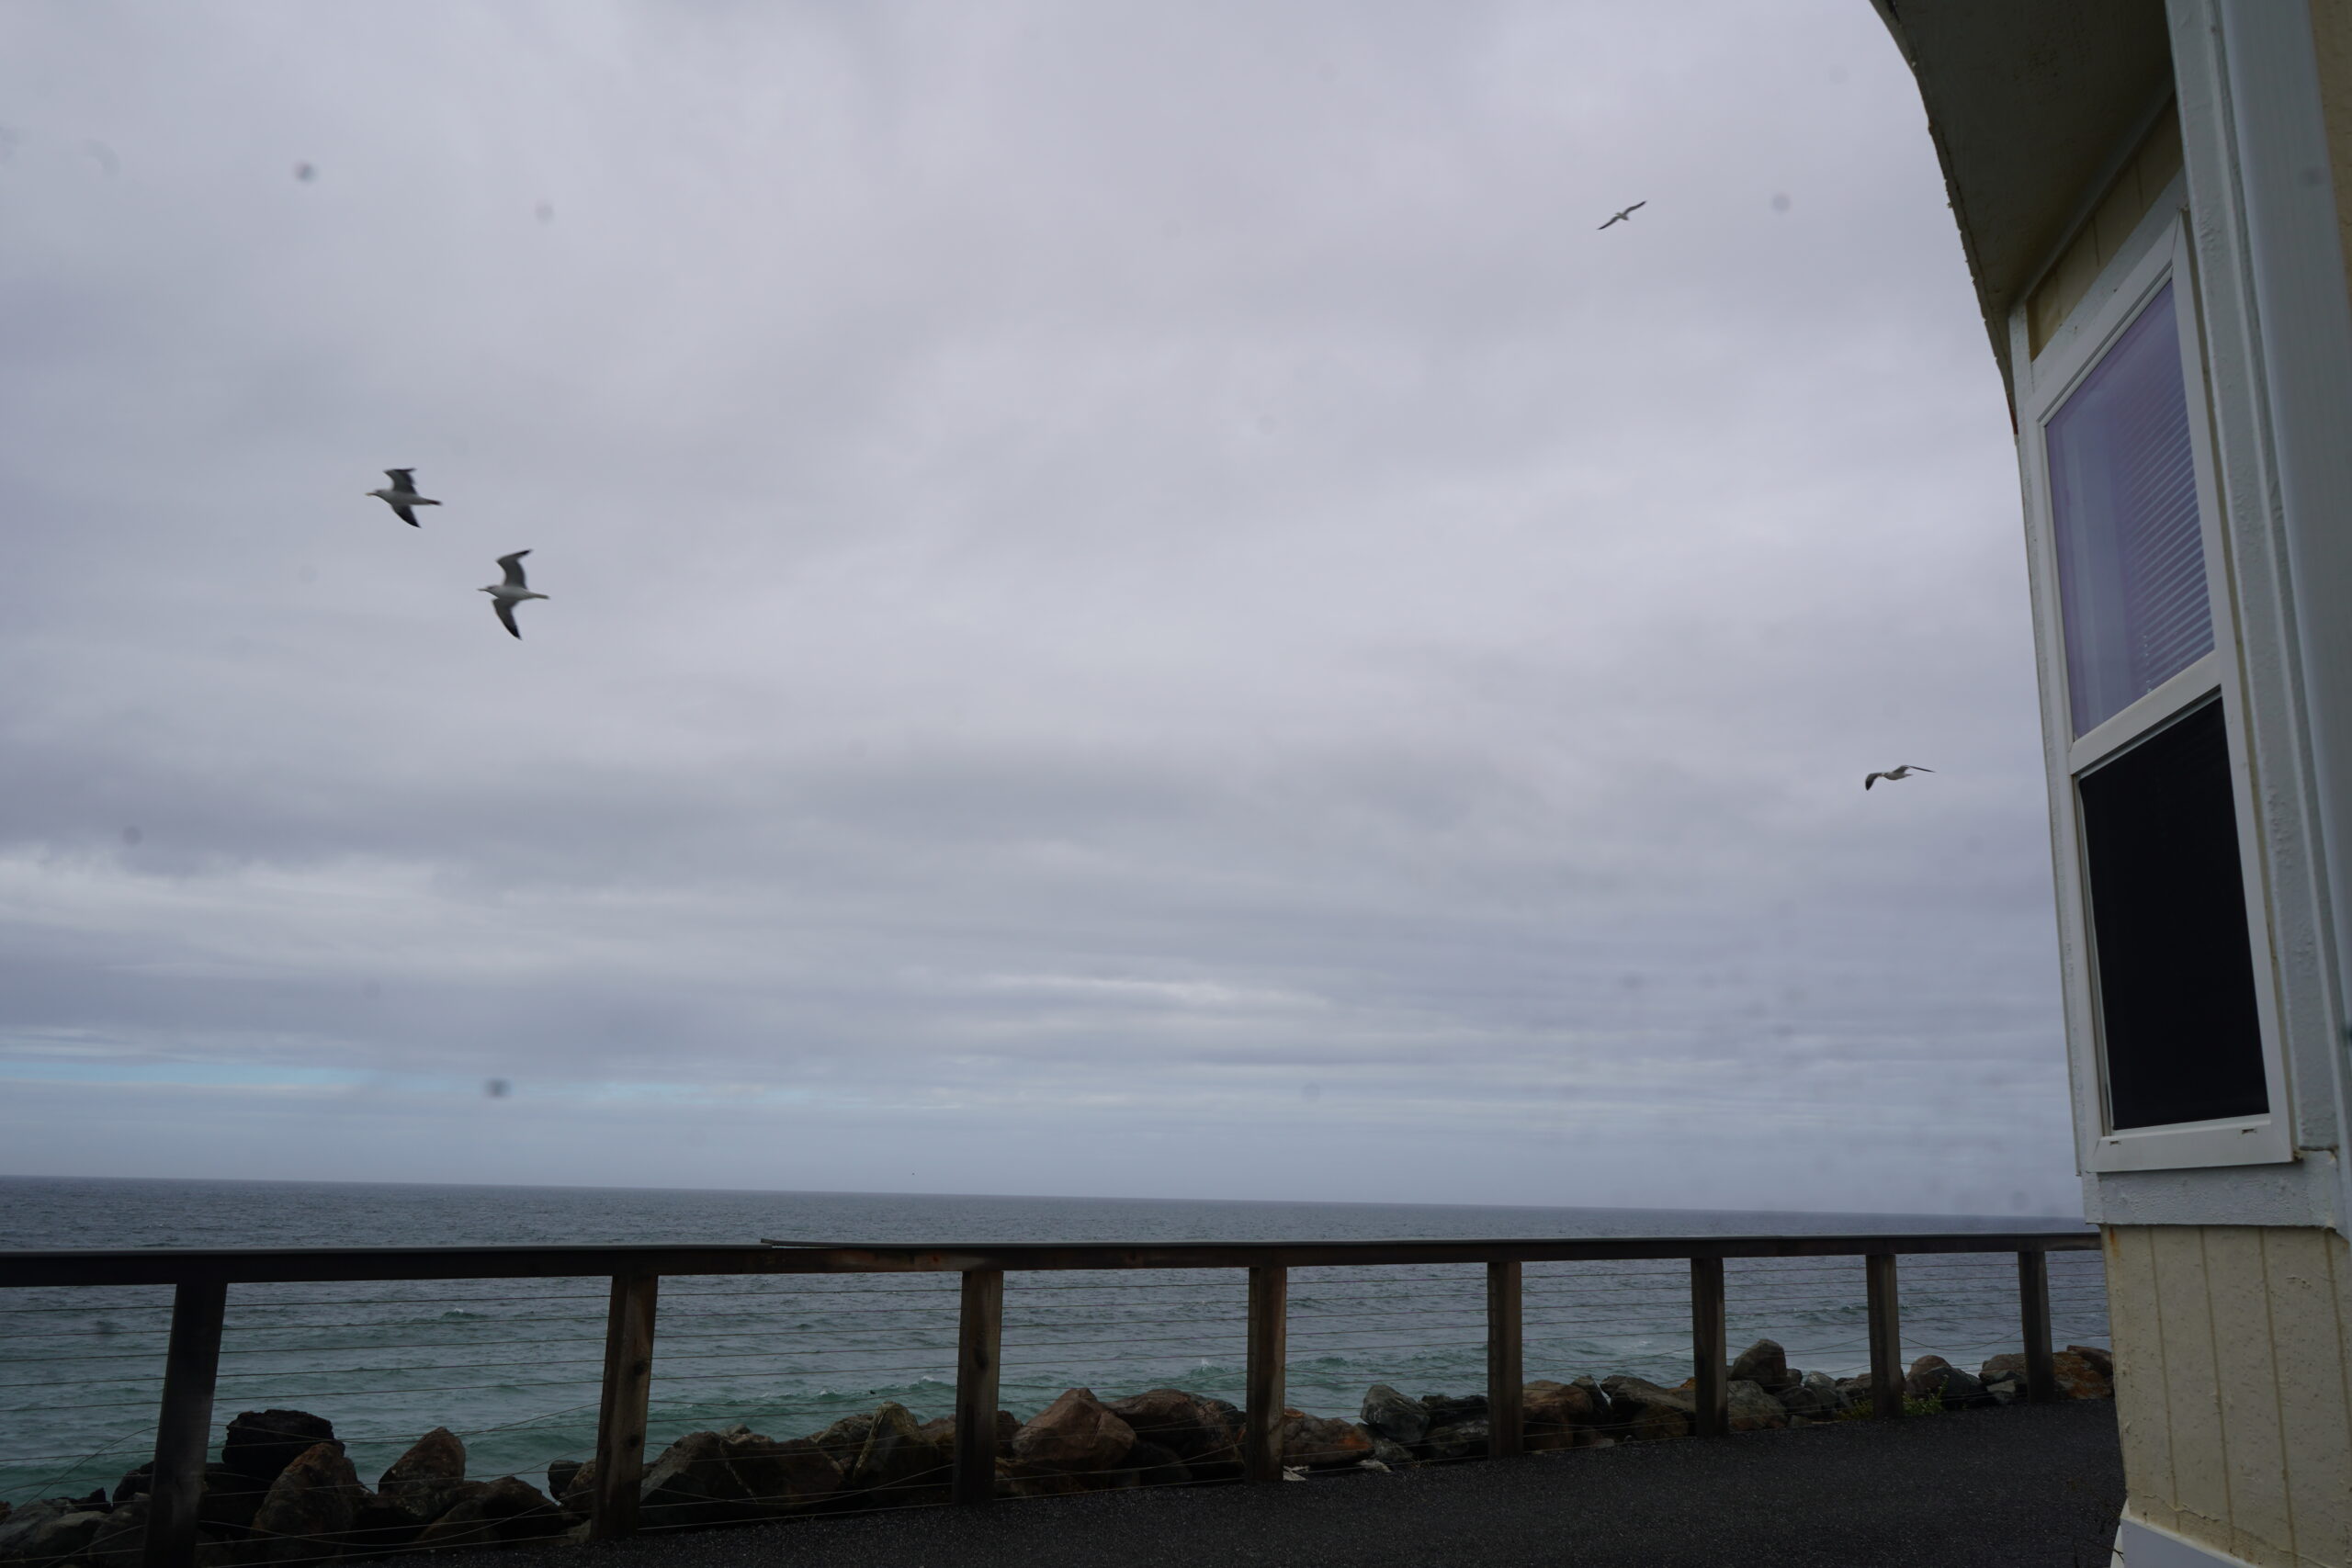 Seaside view with overcast skies and seagulls flying over the ocean, seen from a balcony.